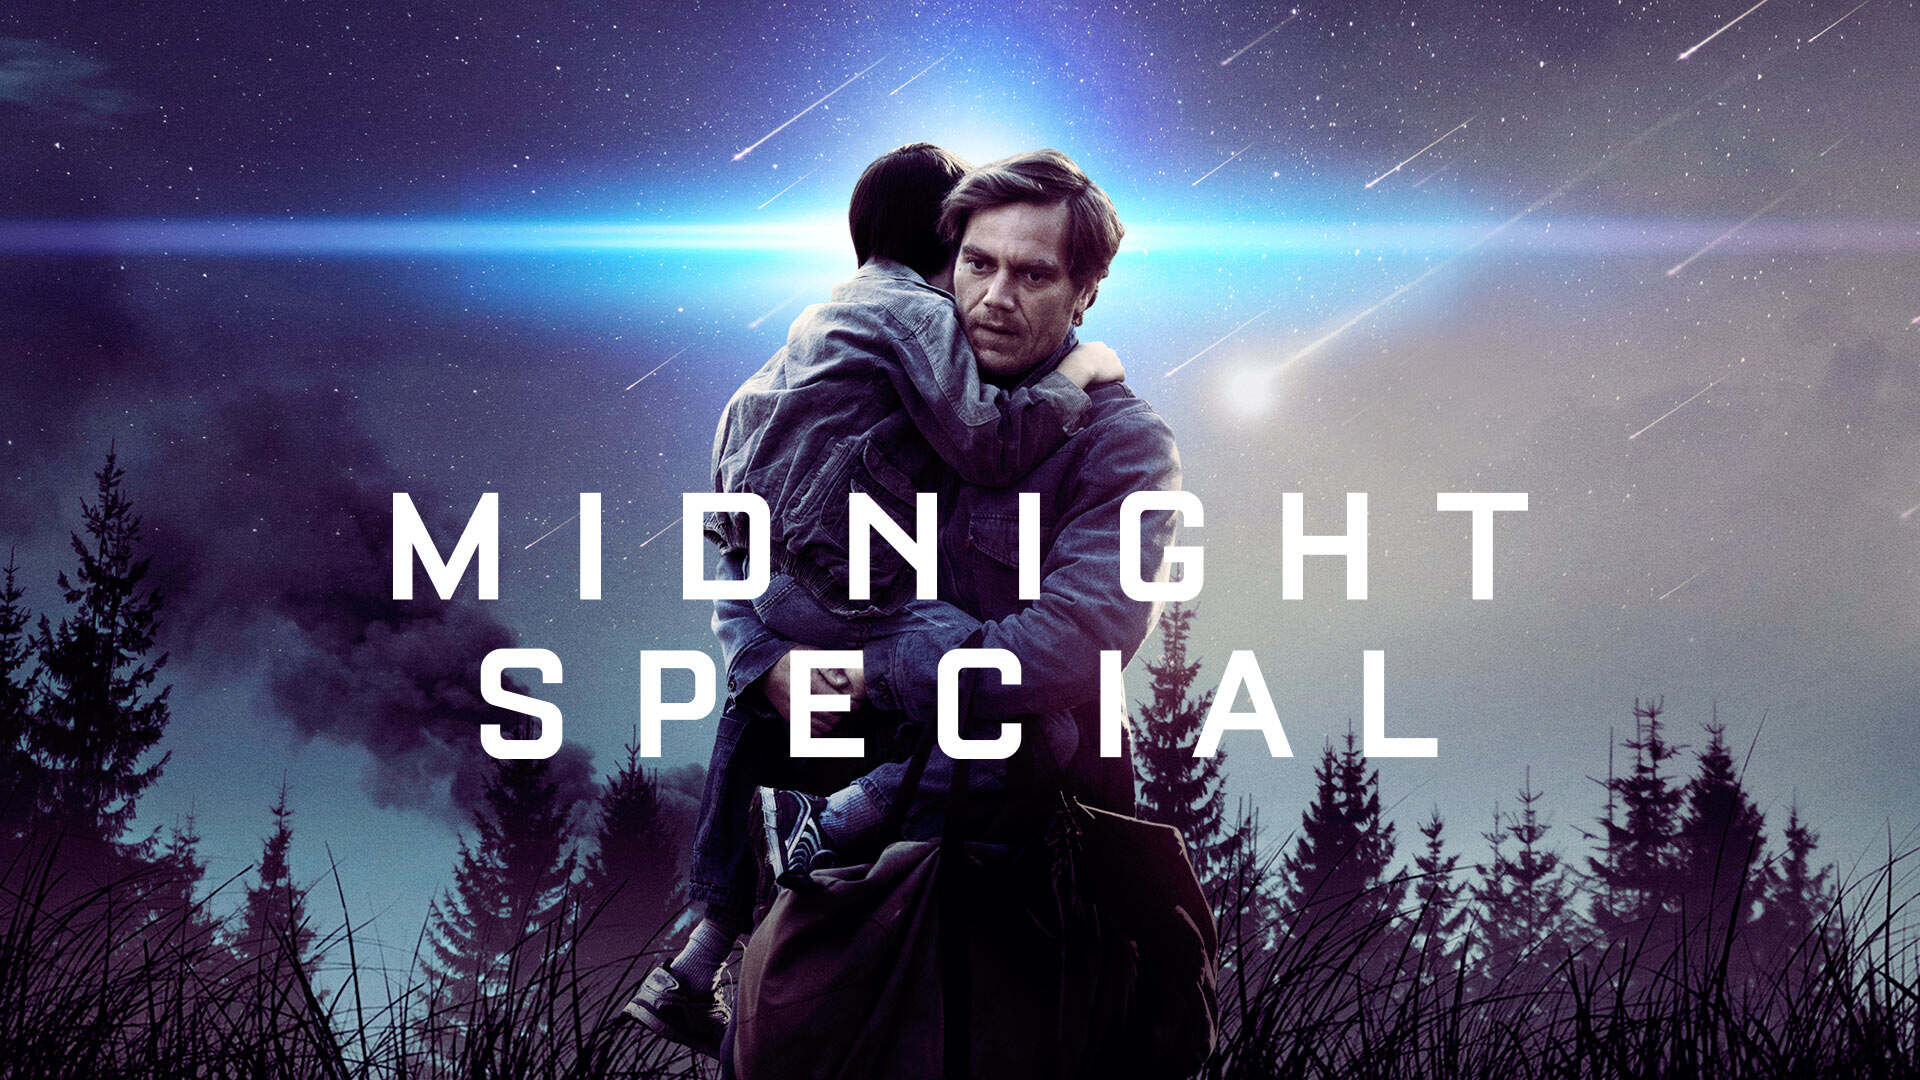 43-facts-about-the-movie-midnight-special